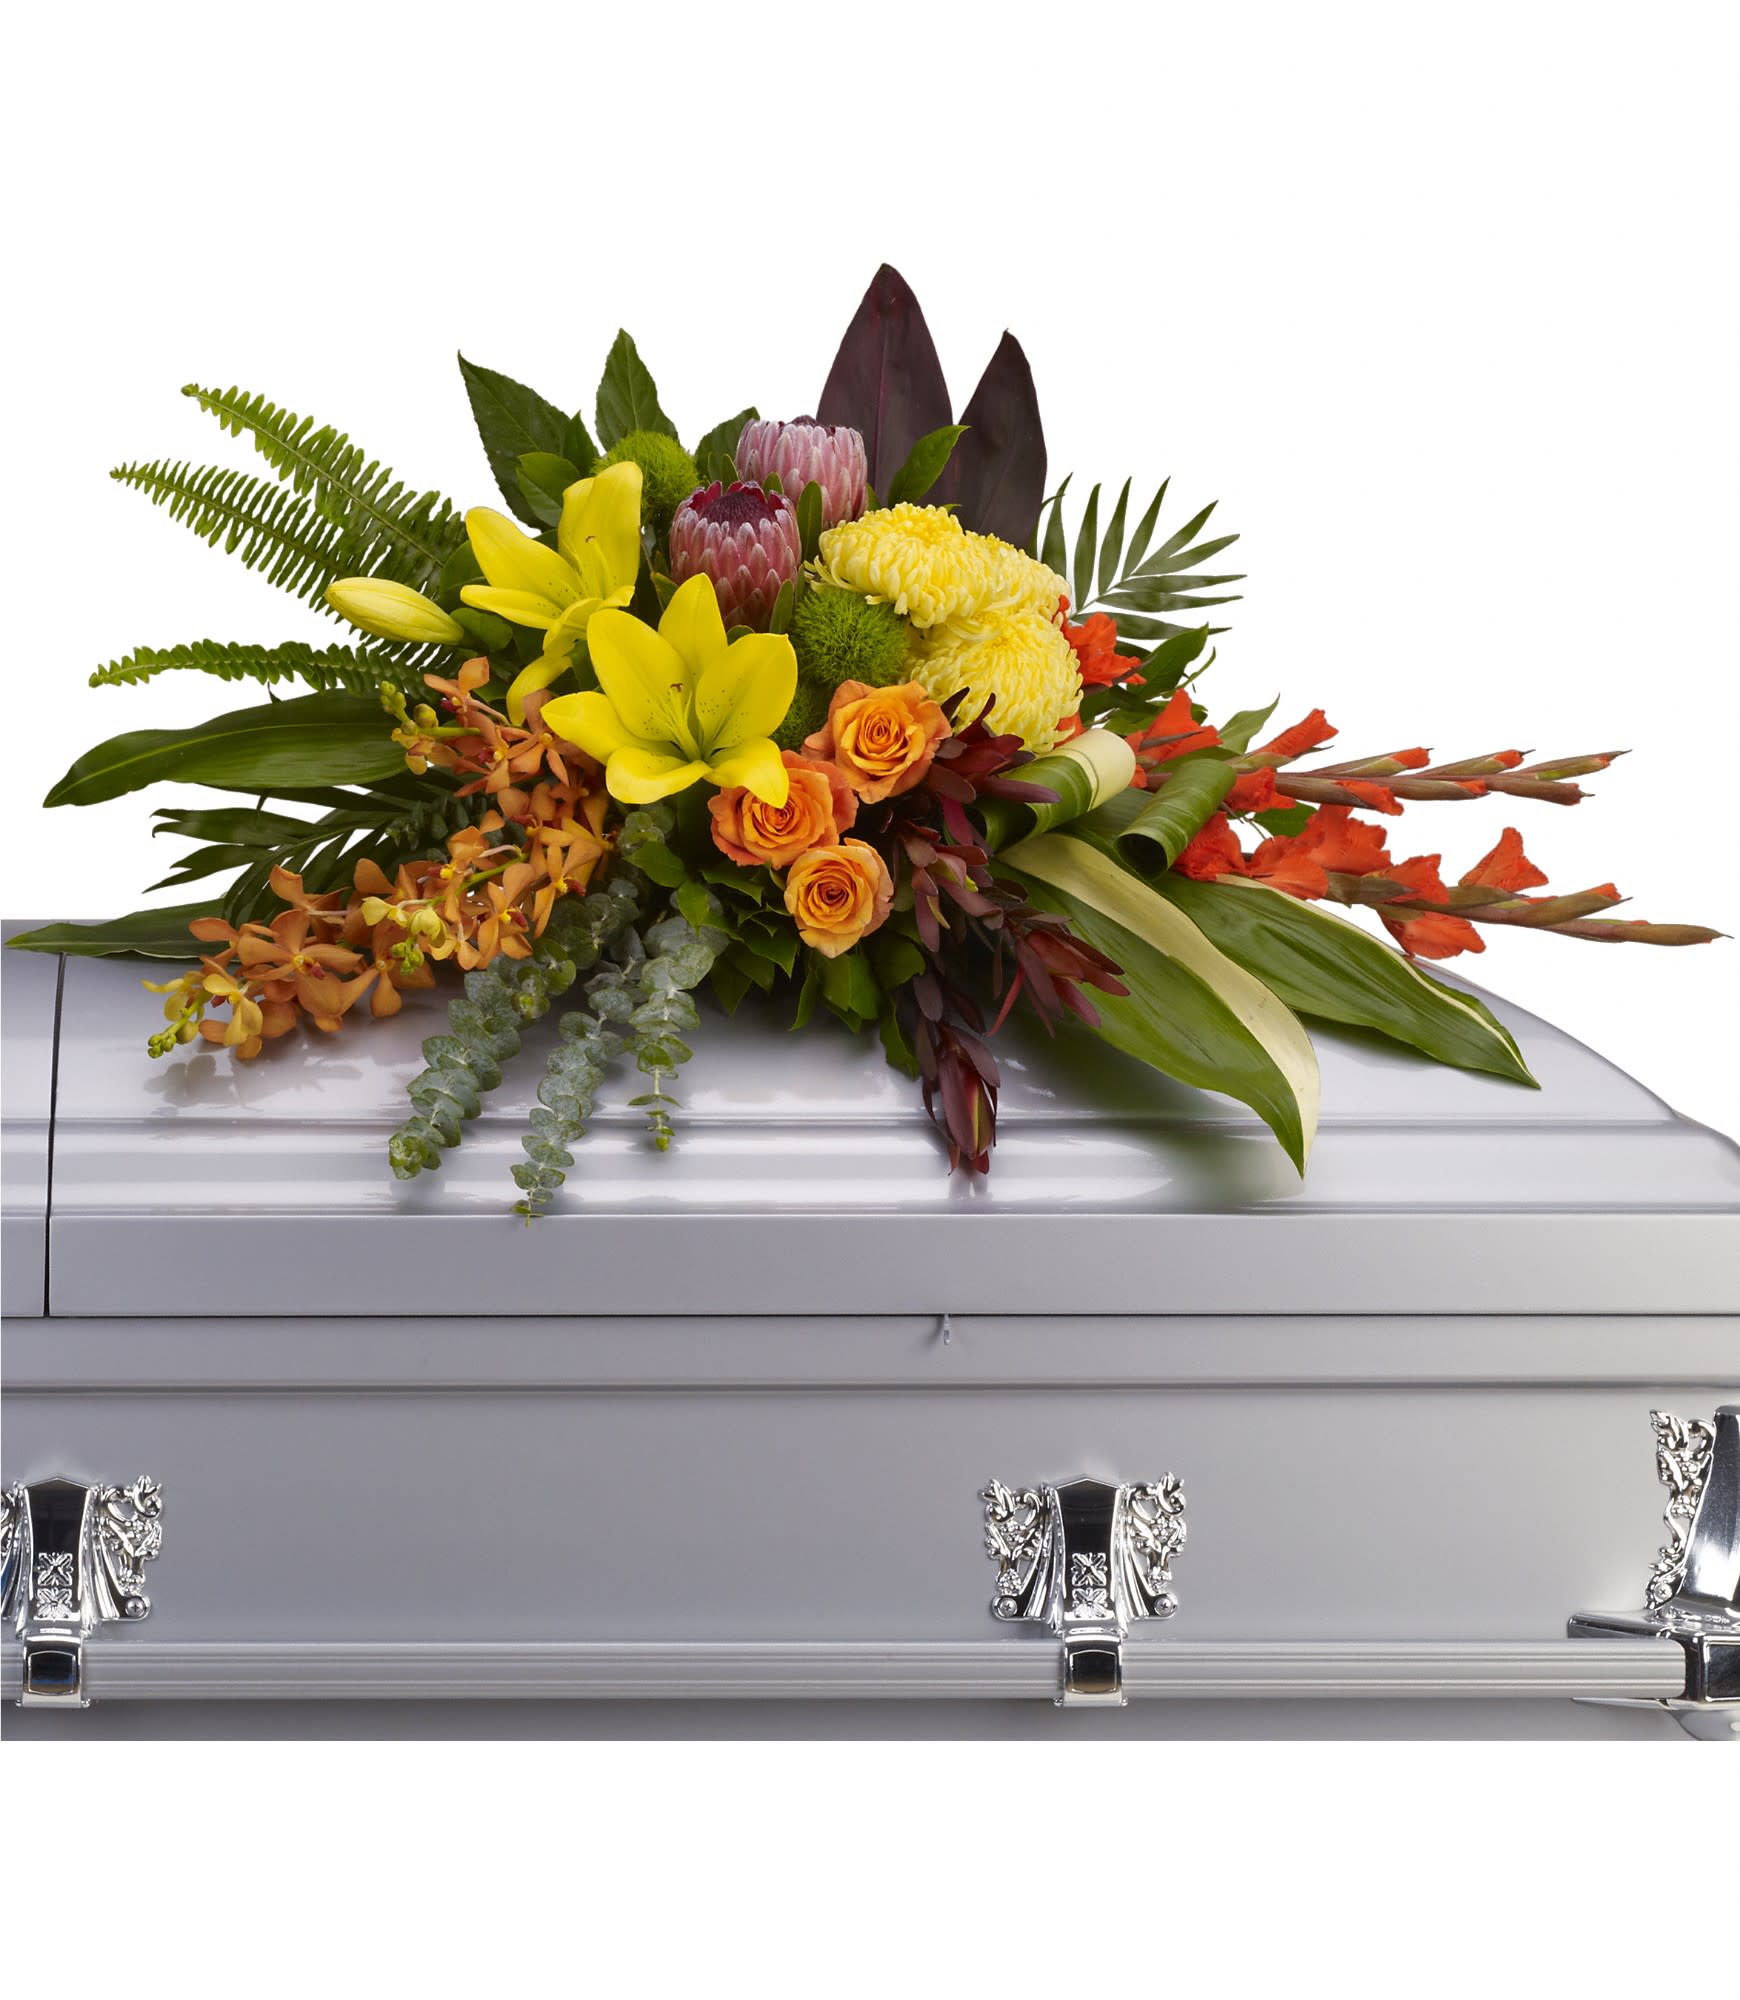 Island Memories Casket Spray by Teleflora - Graceful and fresh, this tropical-influenced spray sheds light on memories that will be forever treasured. Splashed with color and grounded with earth tones, it lends comfort and hope to any memorial.  